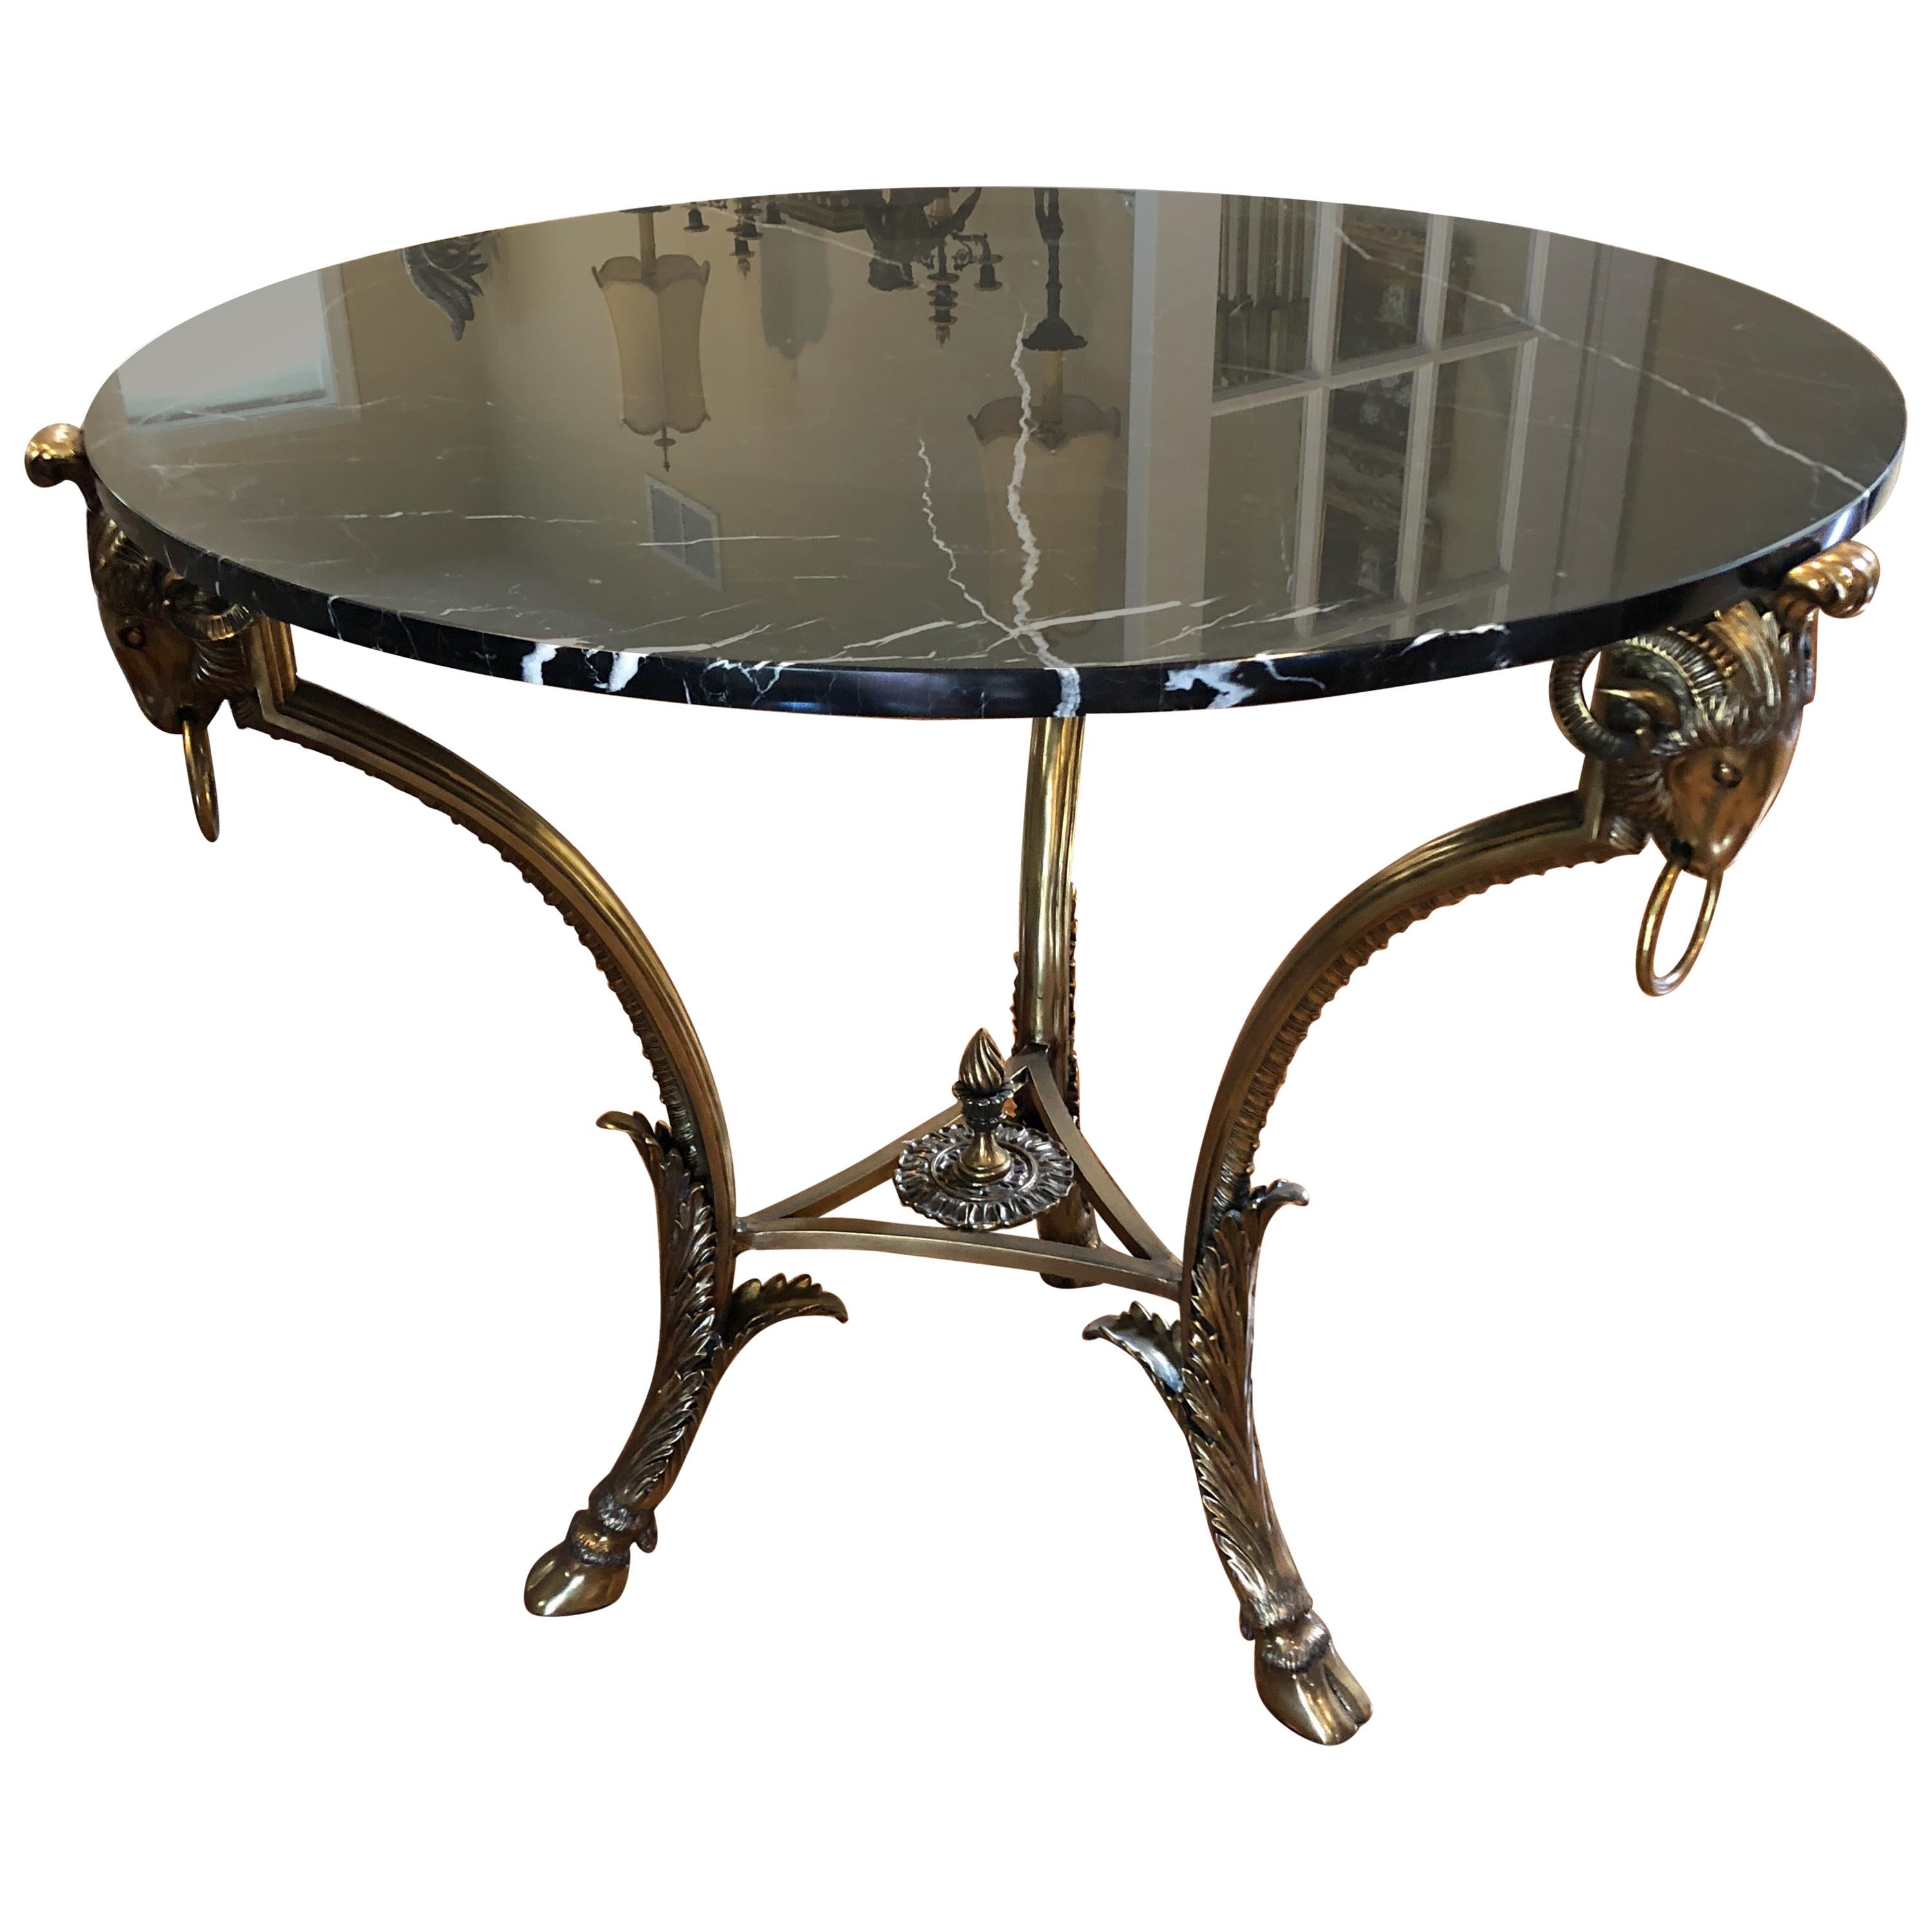 Glamorous LaBarge Black Marble With Ram's Head Motif Brass Centre Round Table